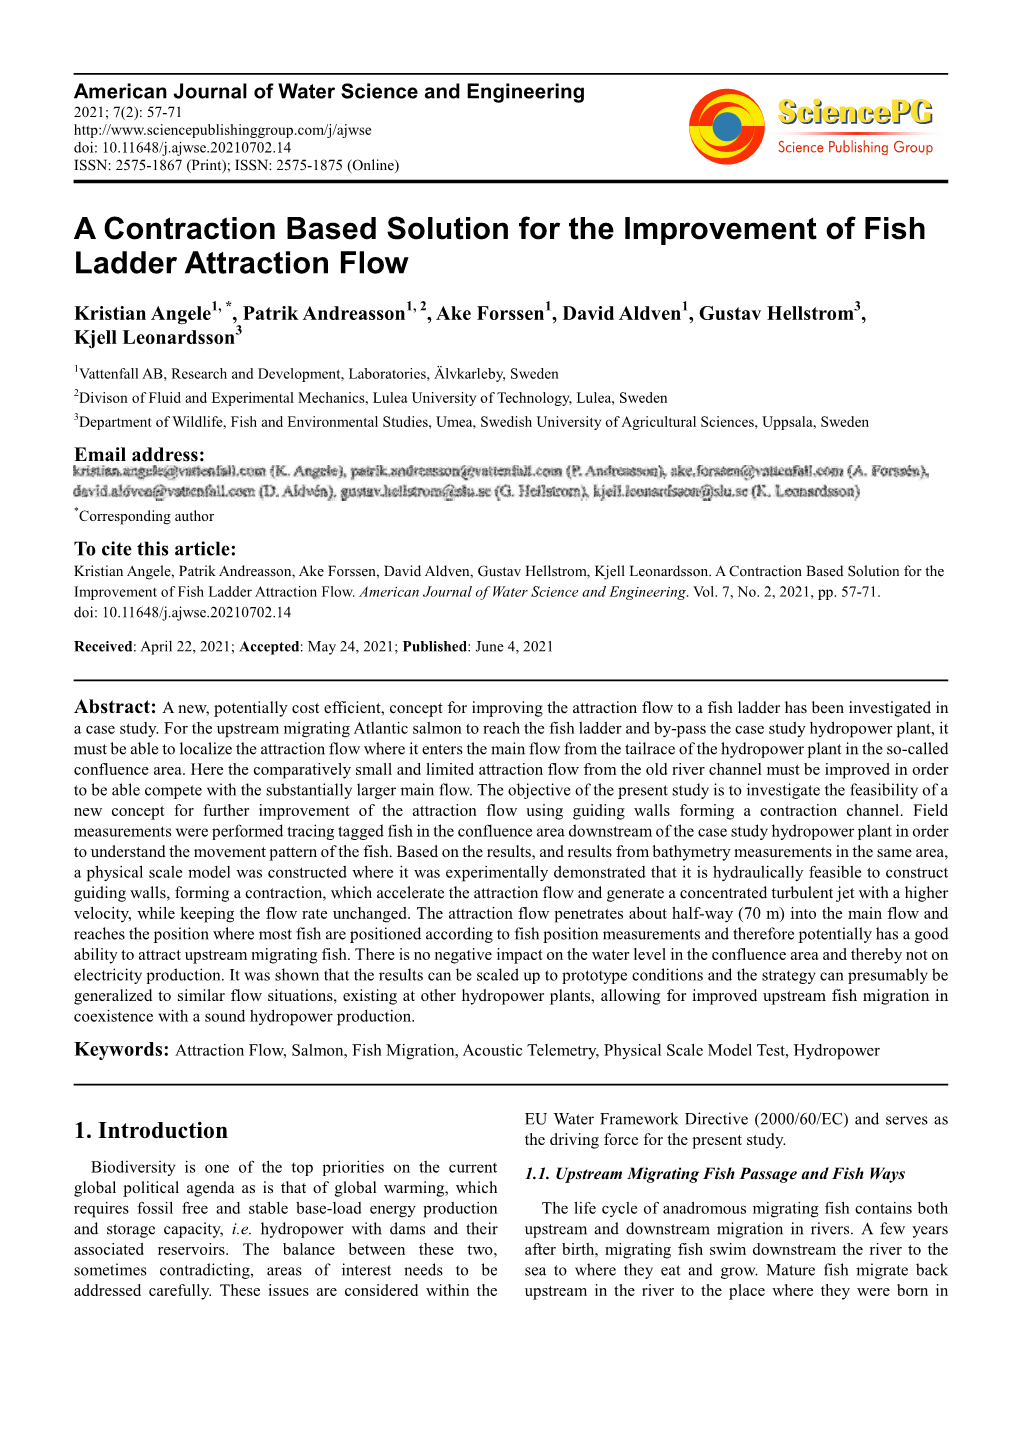 A Contraction Based Solution for the Improvement of Fish Ladder Attraction Flow